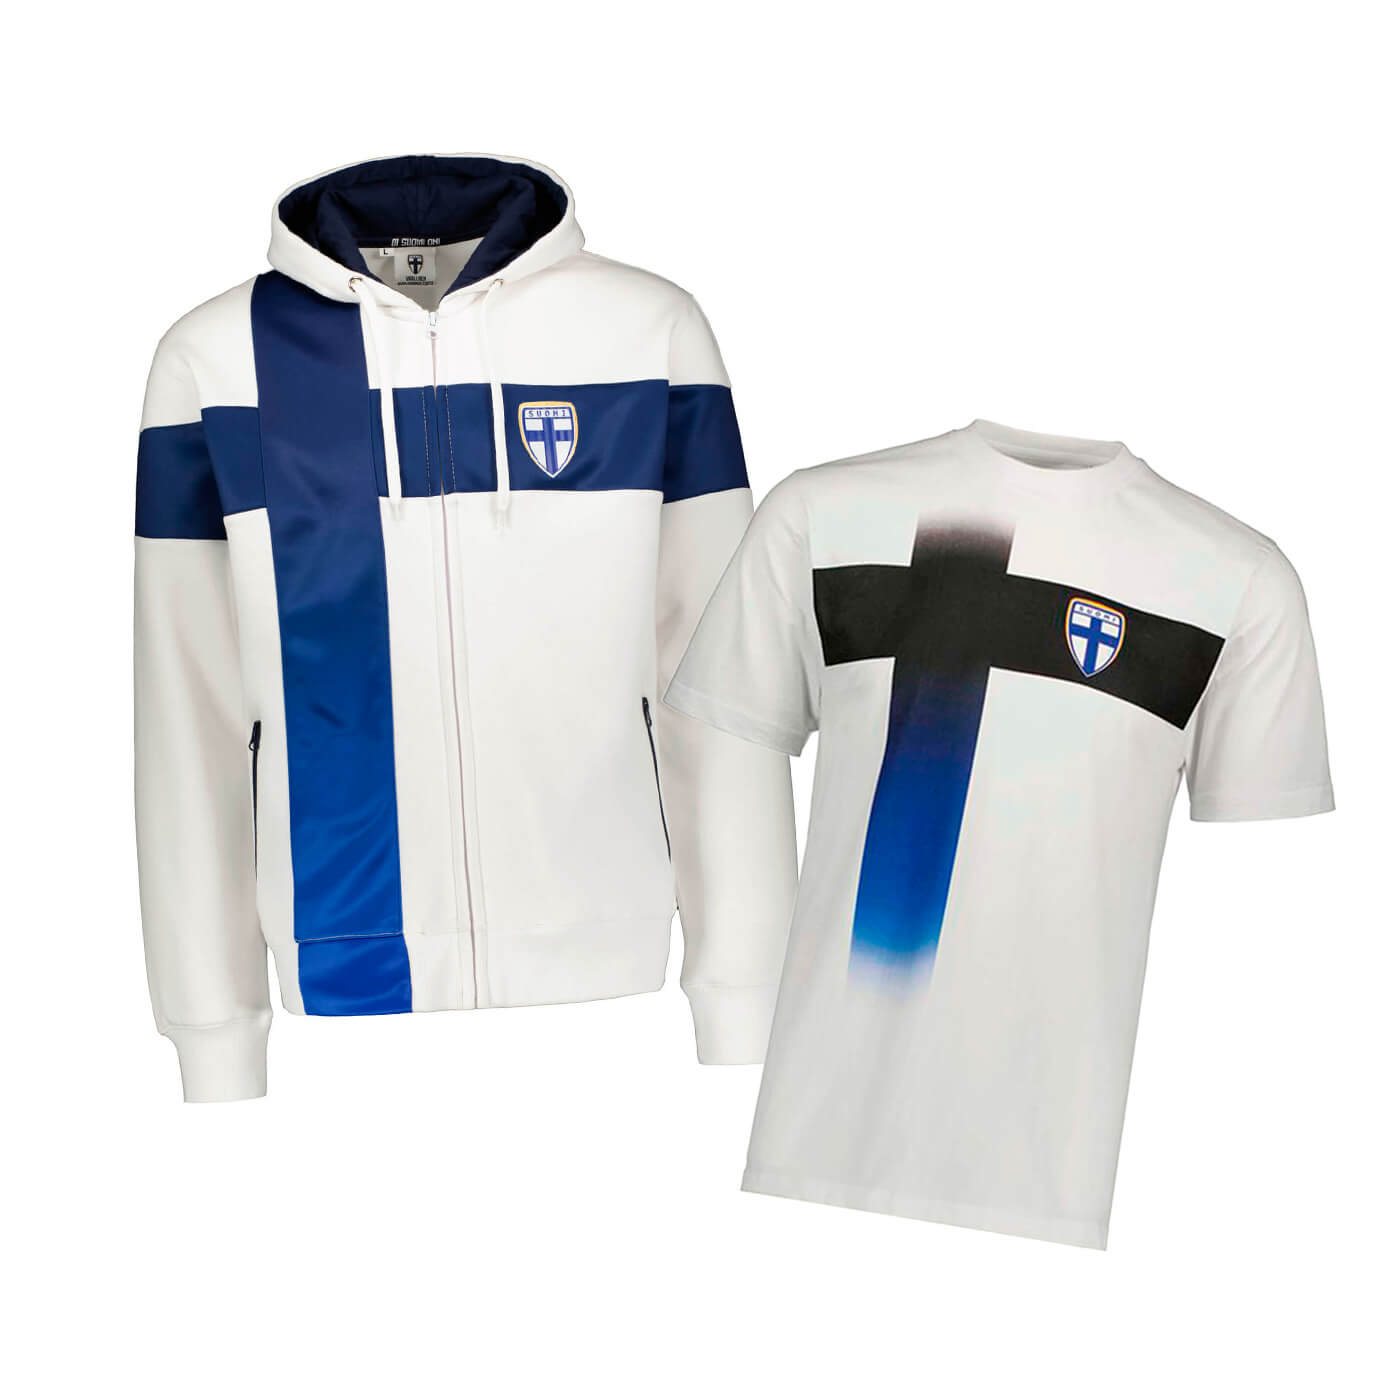 National Team Hoodie 2.0, With Zipper and Cotton Fan T-shirt, Bundle